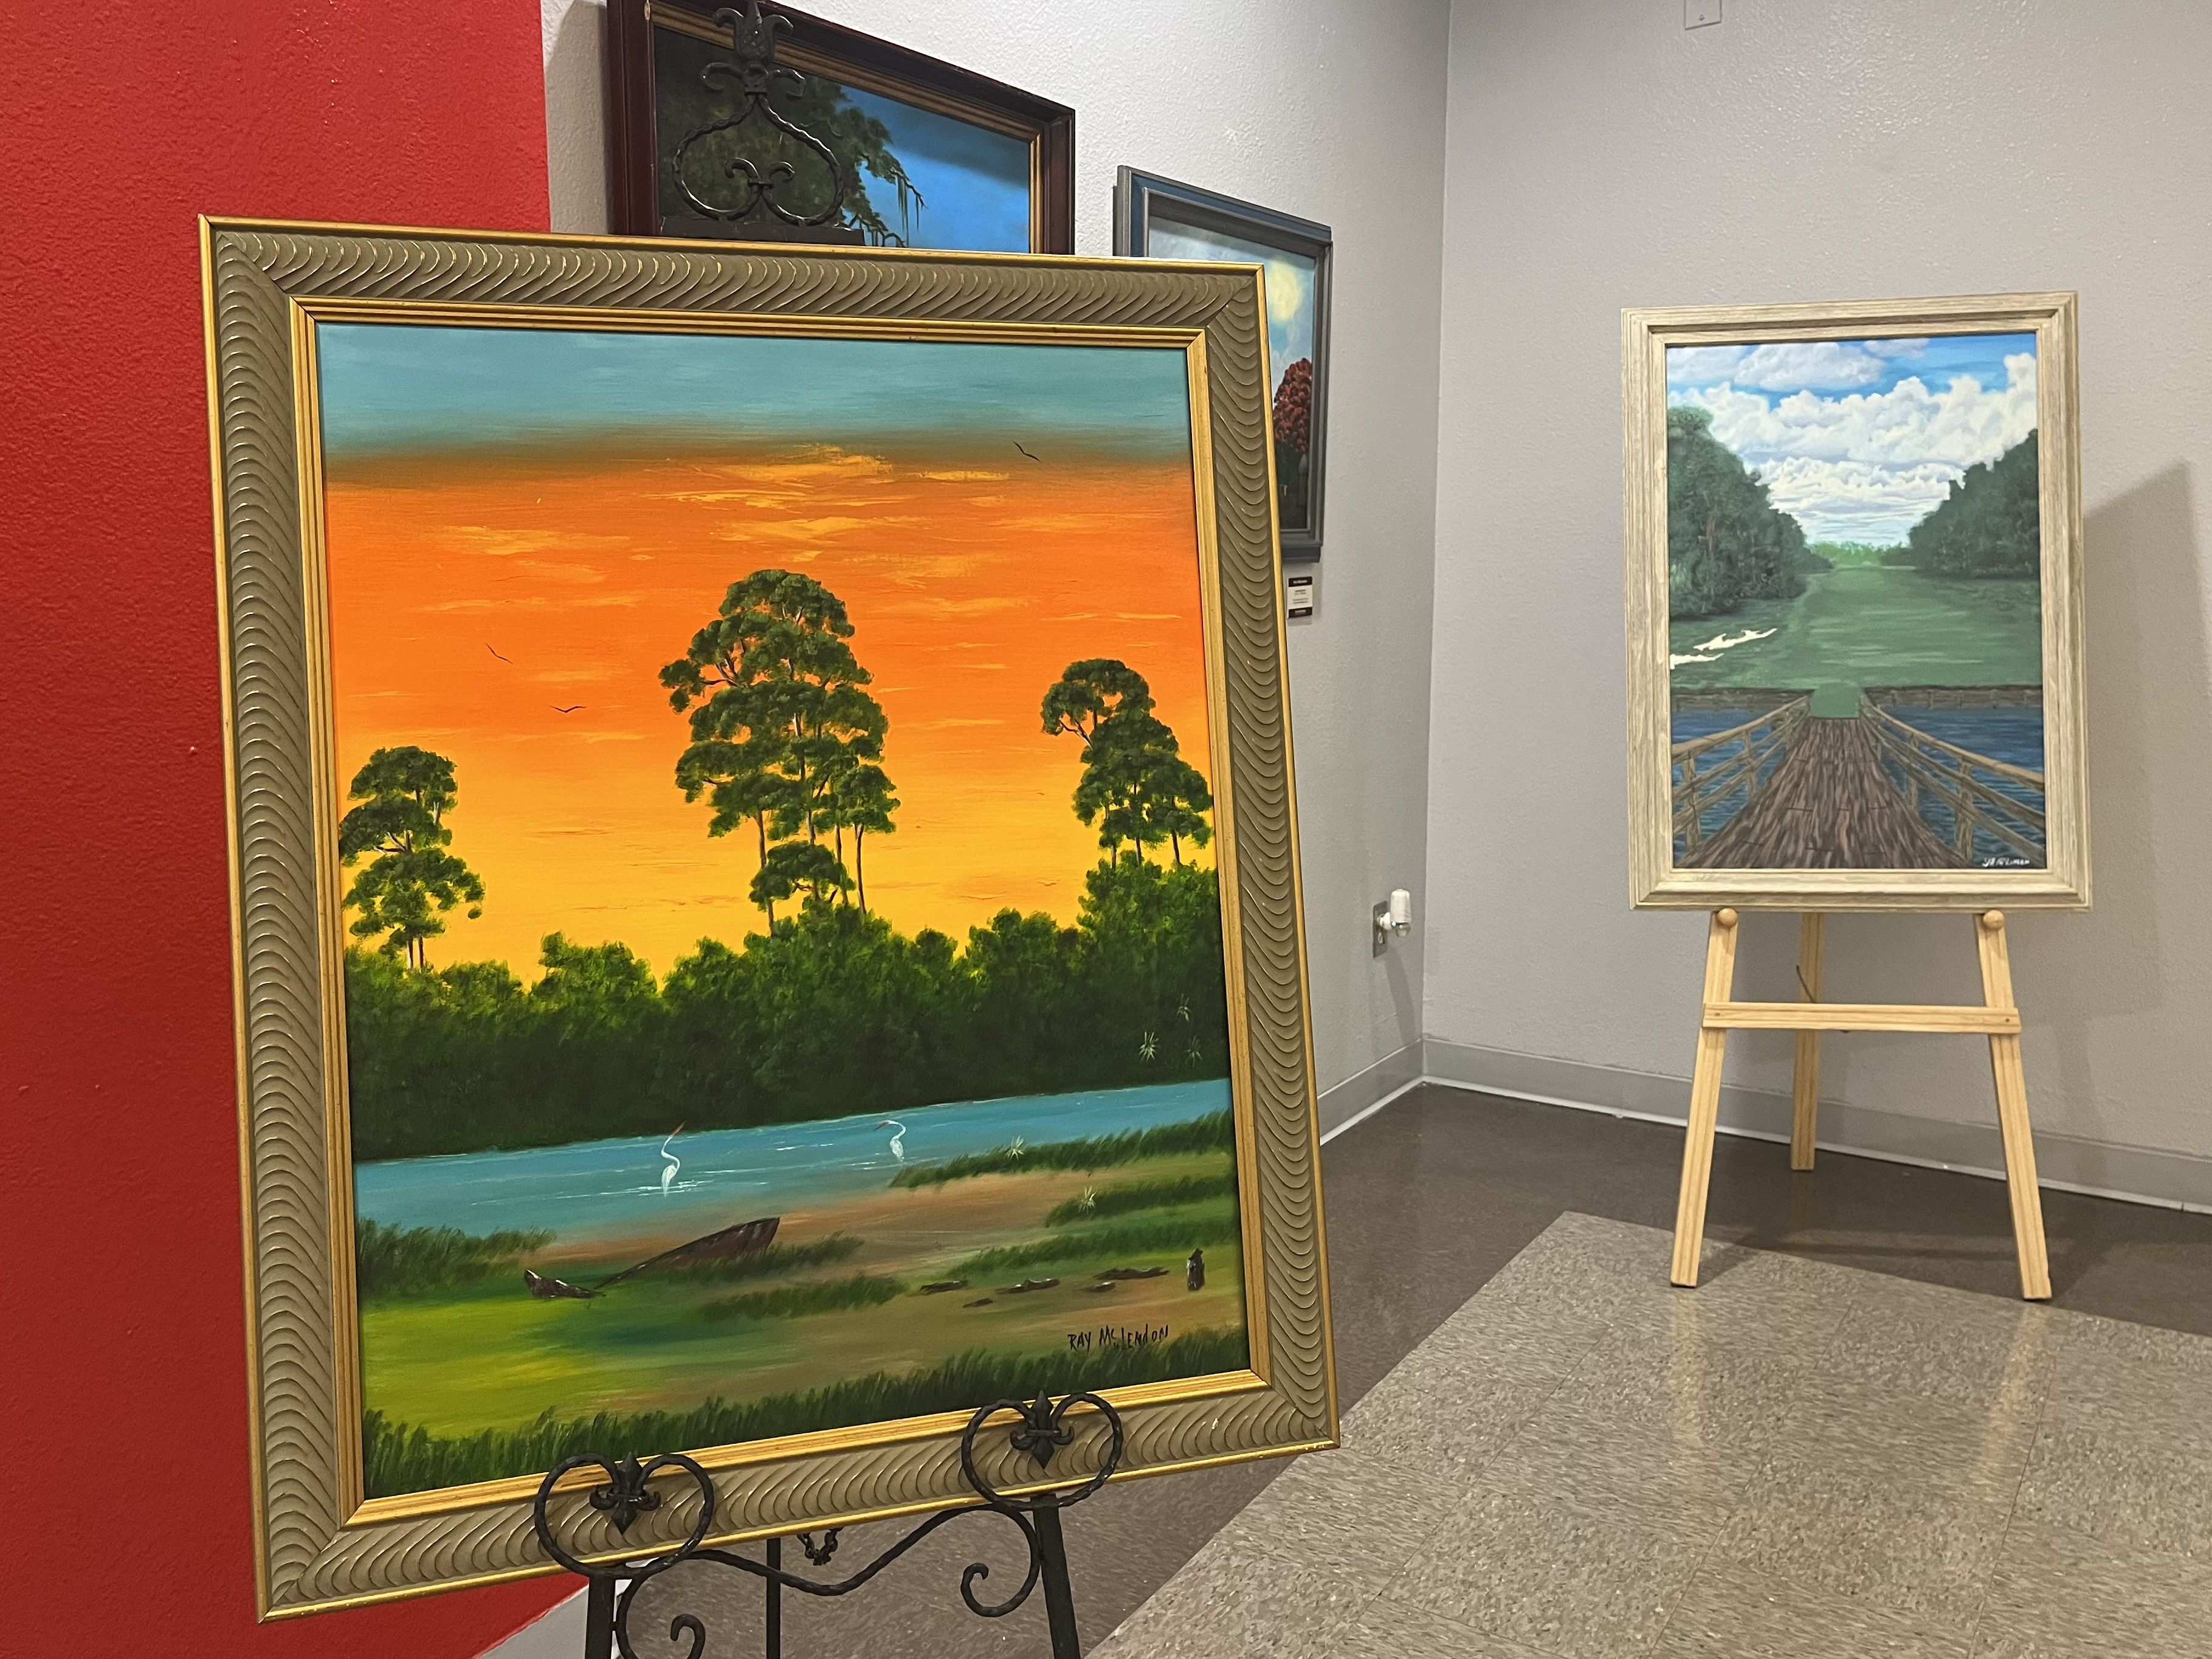 Two paintings, one of an orange-yellow sunset over a lagoon, the other of a bridge looking onto green water.